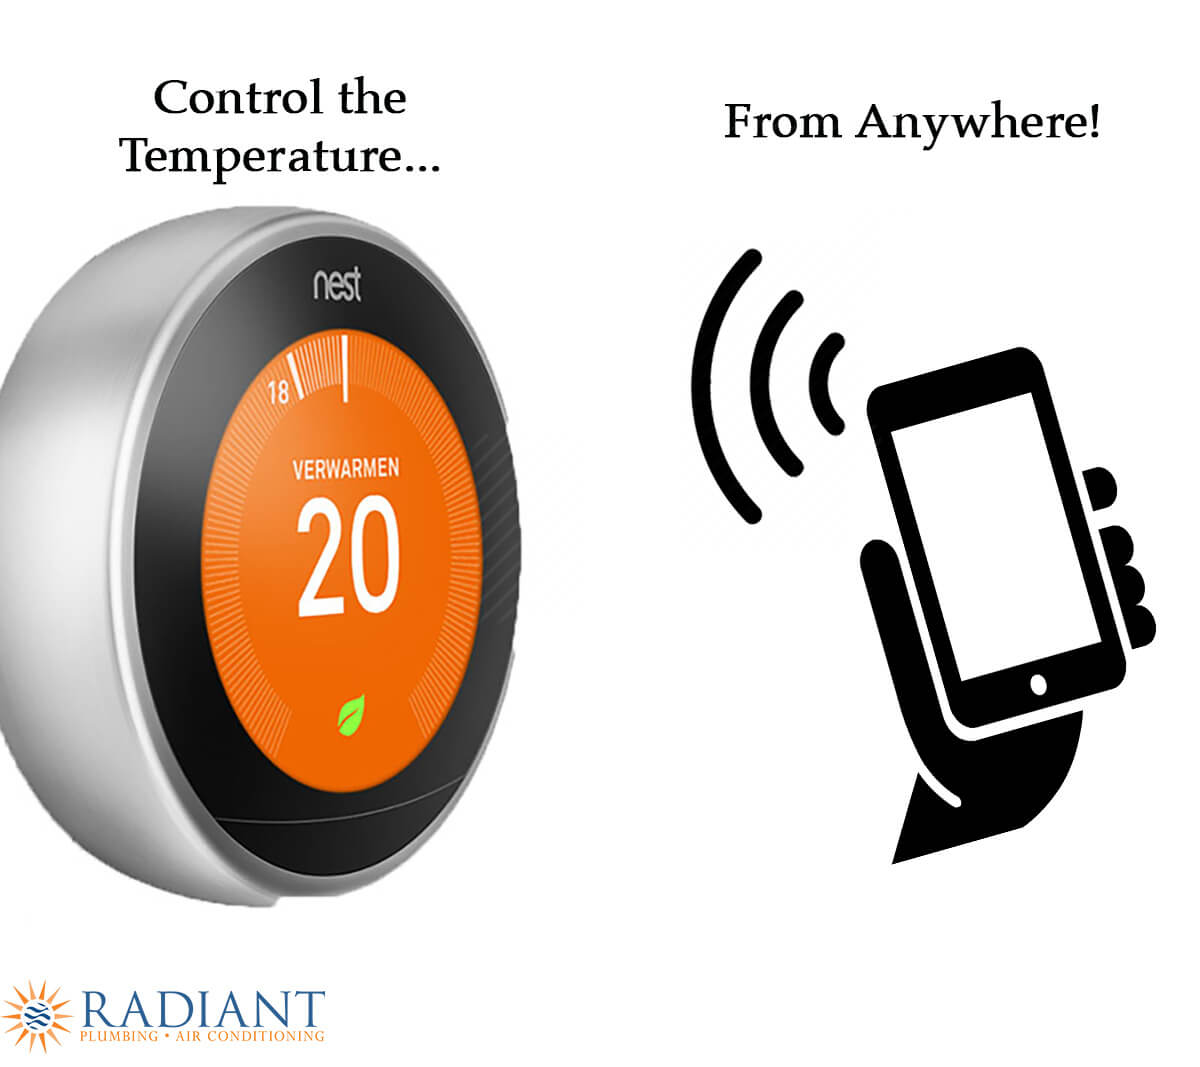 A graphic of a Nest thermostat and graphic of image holding a mobile device with WiFi signal